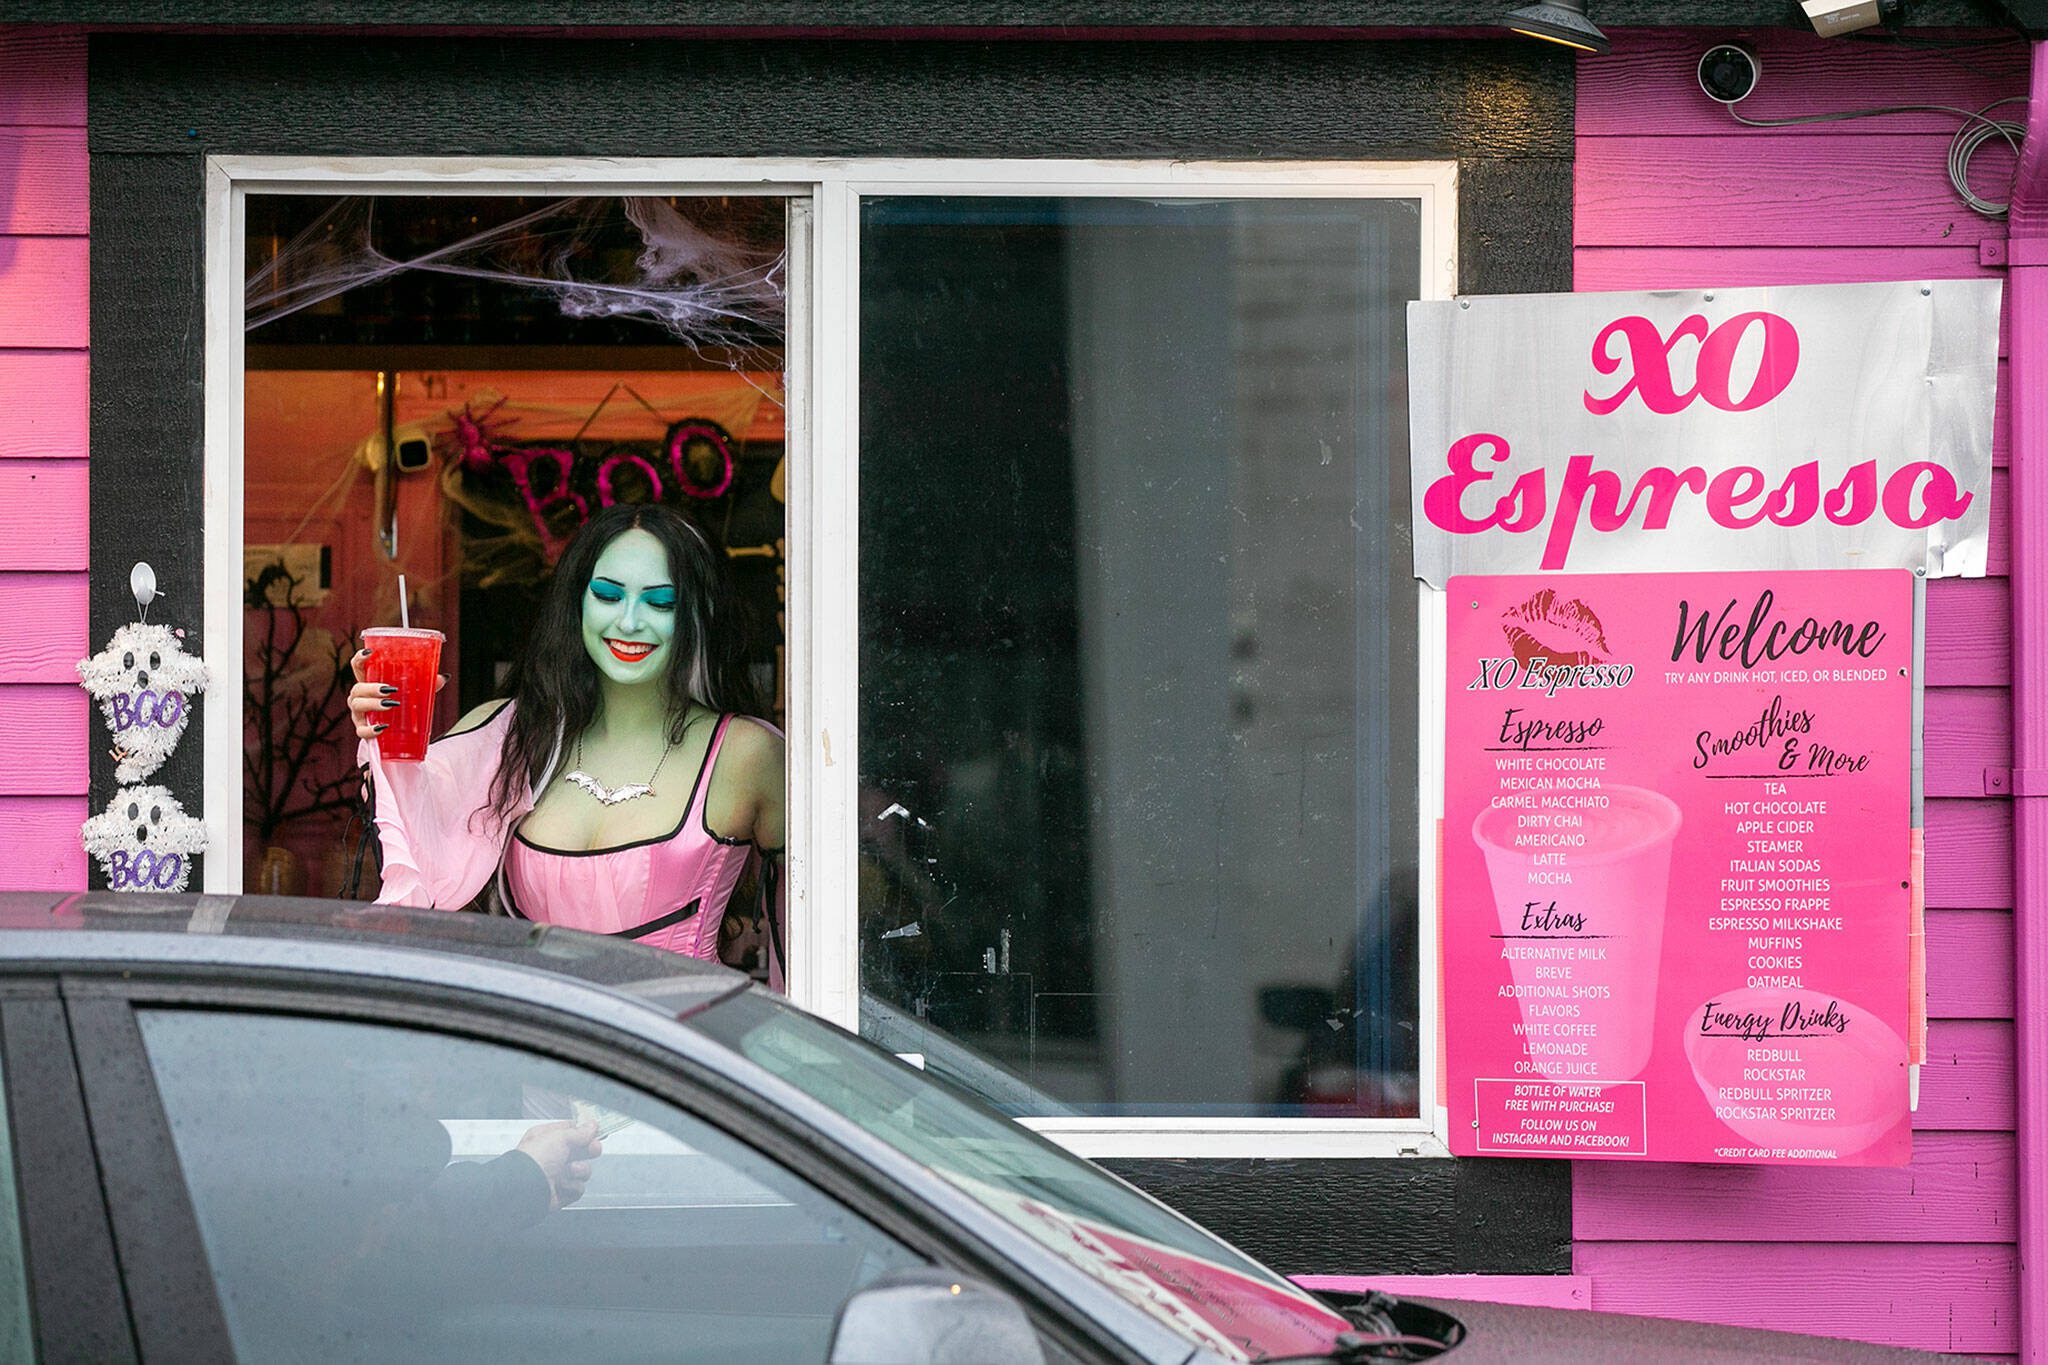 Emma Dilemma, a makeup artist and bikini barista for the last year and a half, serves a drink to a customer while dressed as Lily Munster Tuesday, Oct. 25, 2022, at XO Espresso on 41st Street in Everett, Washington. (Ryan Berry / The Herald)